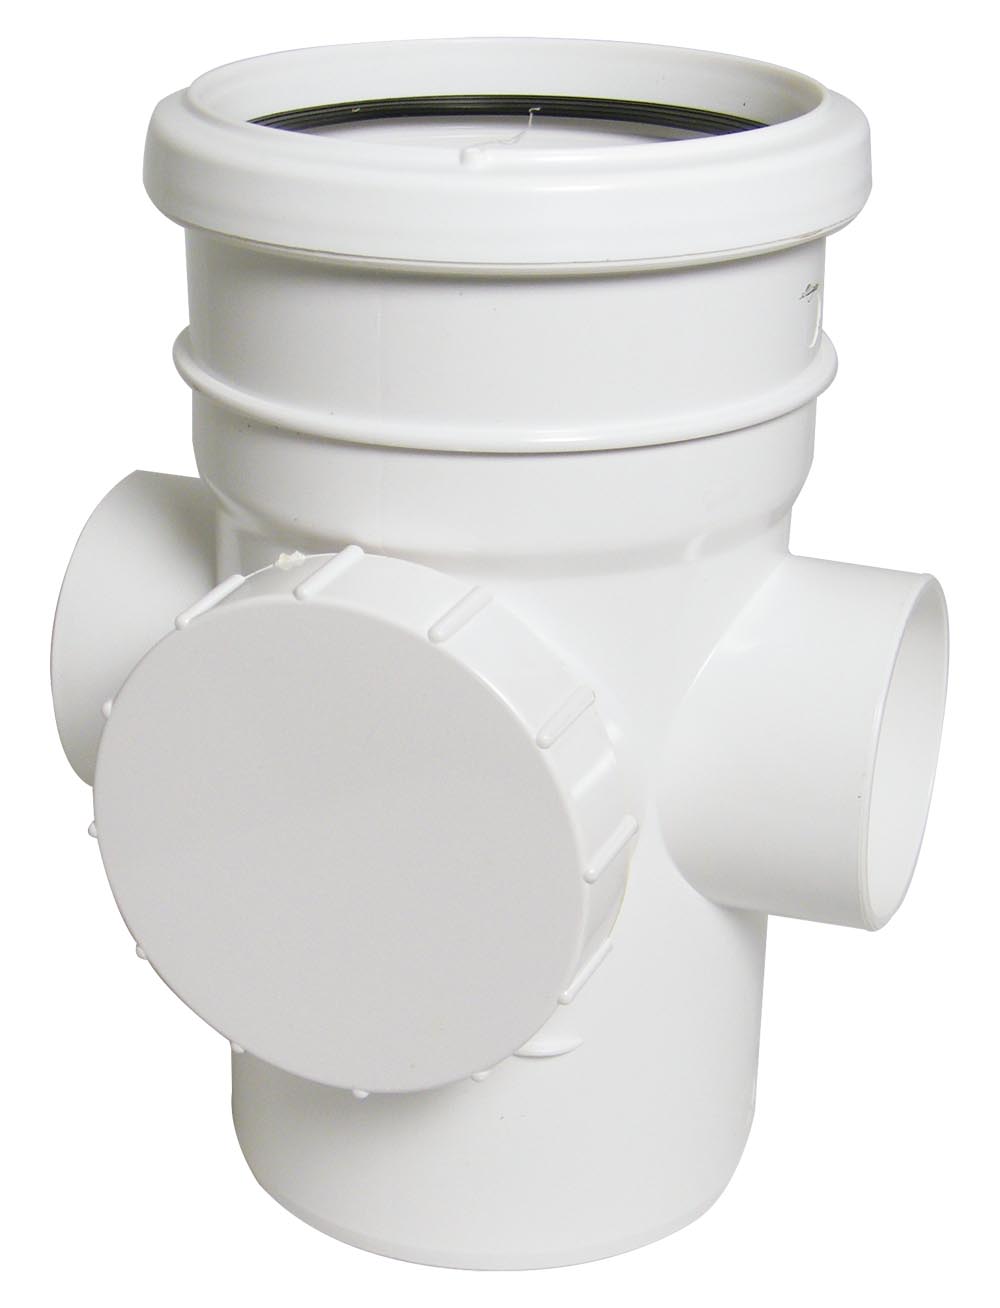 Floplast SP274WH 110mm/4 Inch Ring Seal Soil System - Access Pipe Single Socket - White